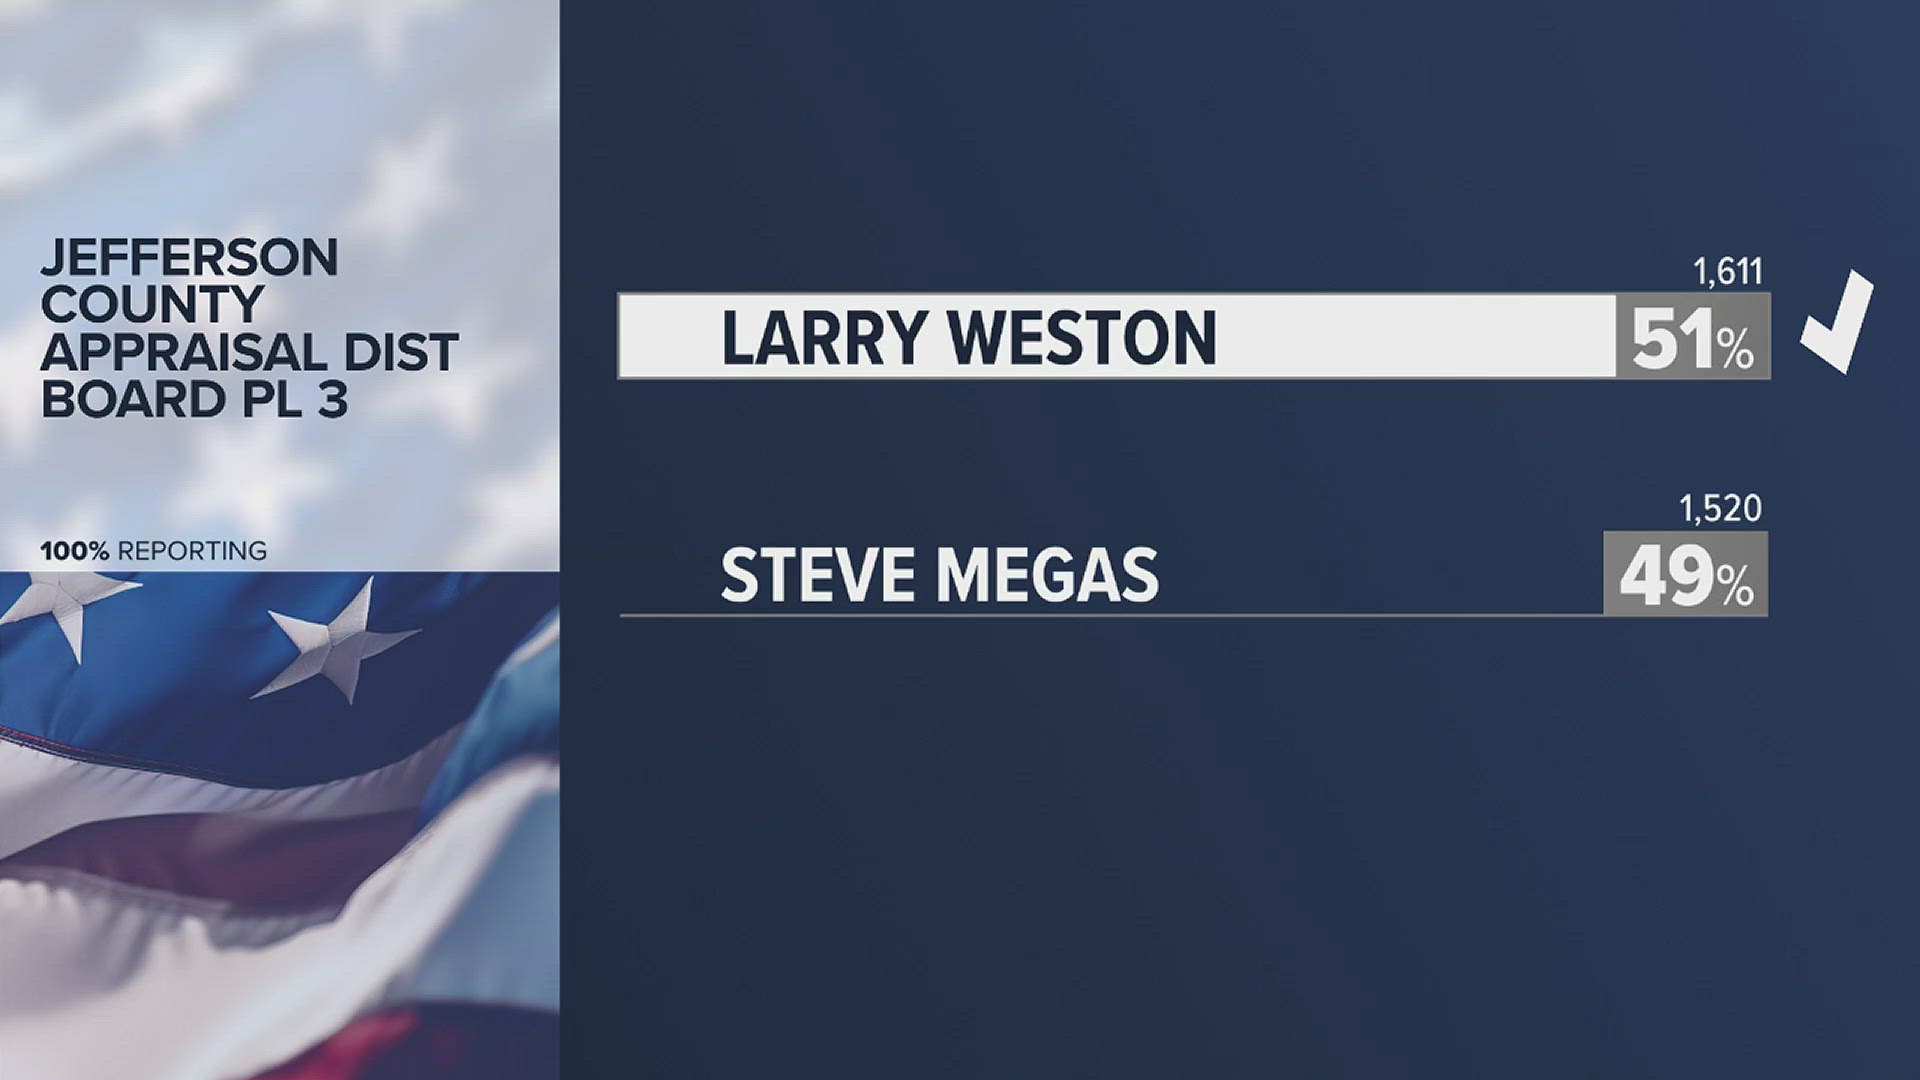 Vernon Durden wins with 52% and Larry Weston won with 51%